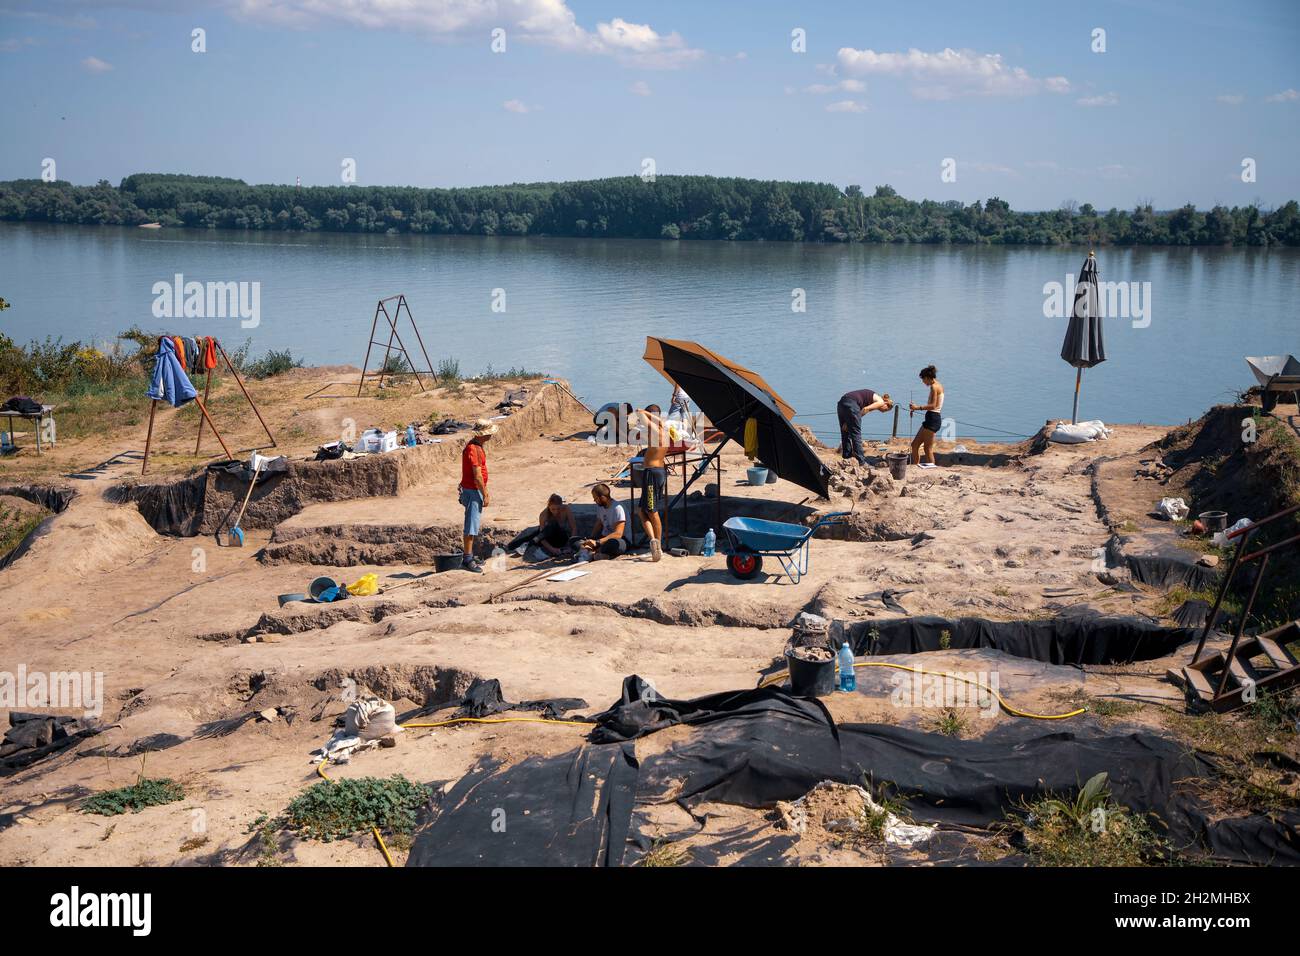 Vinča, Serbia, Sep 4, 2021: A team of archaeologists working on the site of excavations at the banks of the Danube Stock Photo